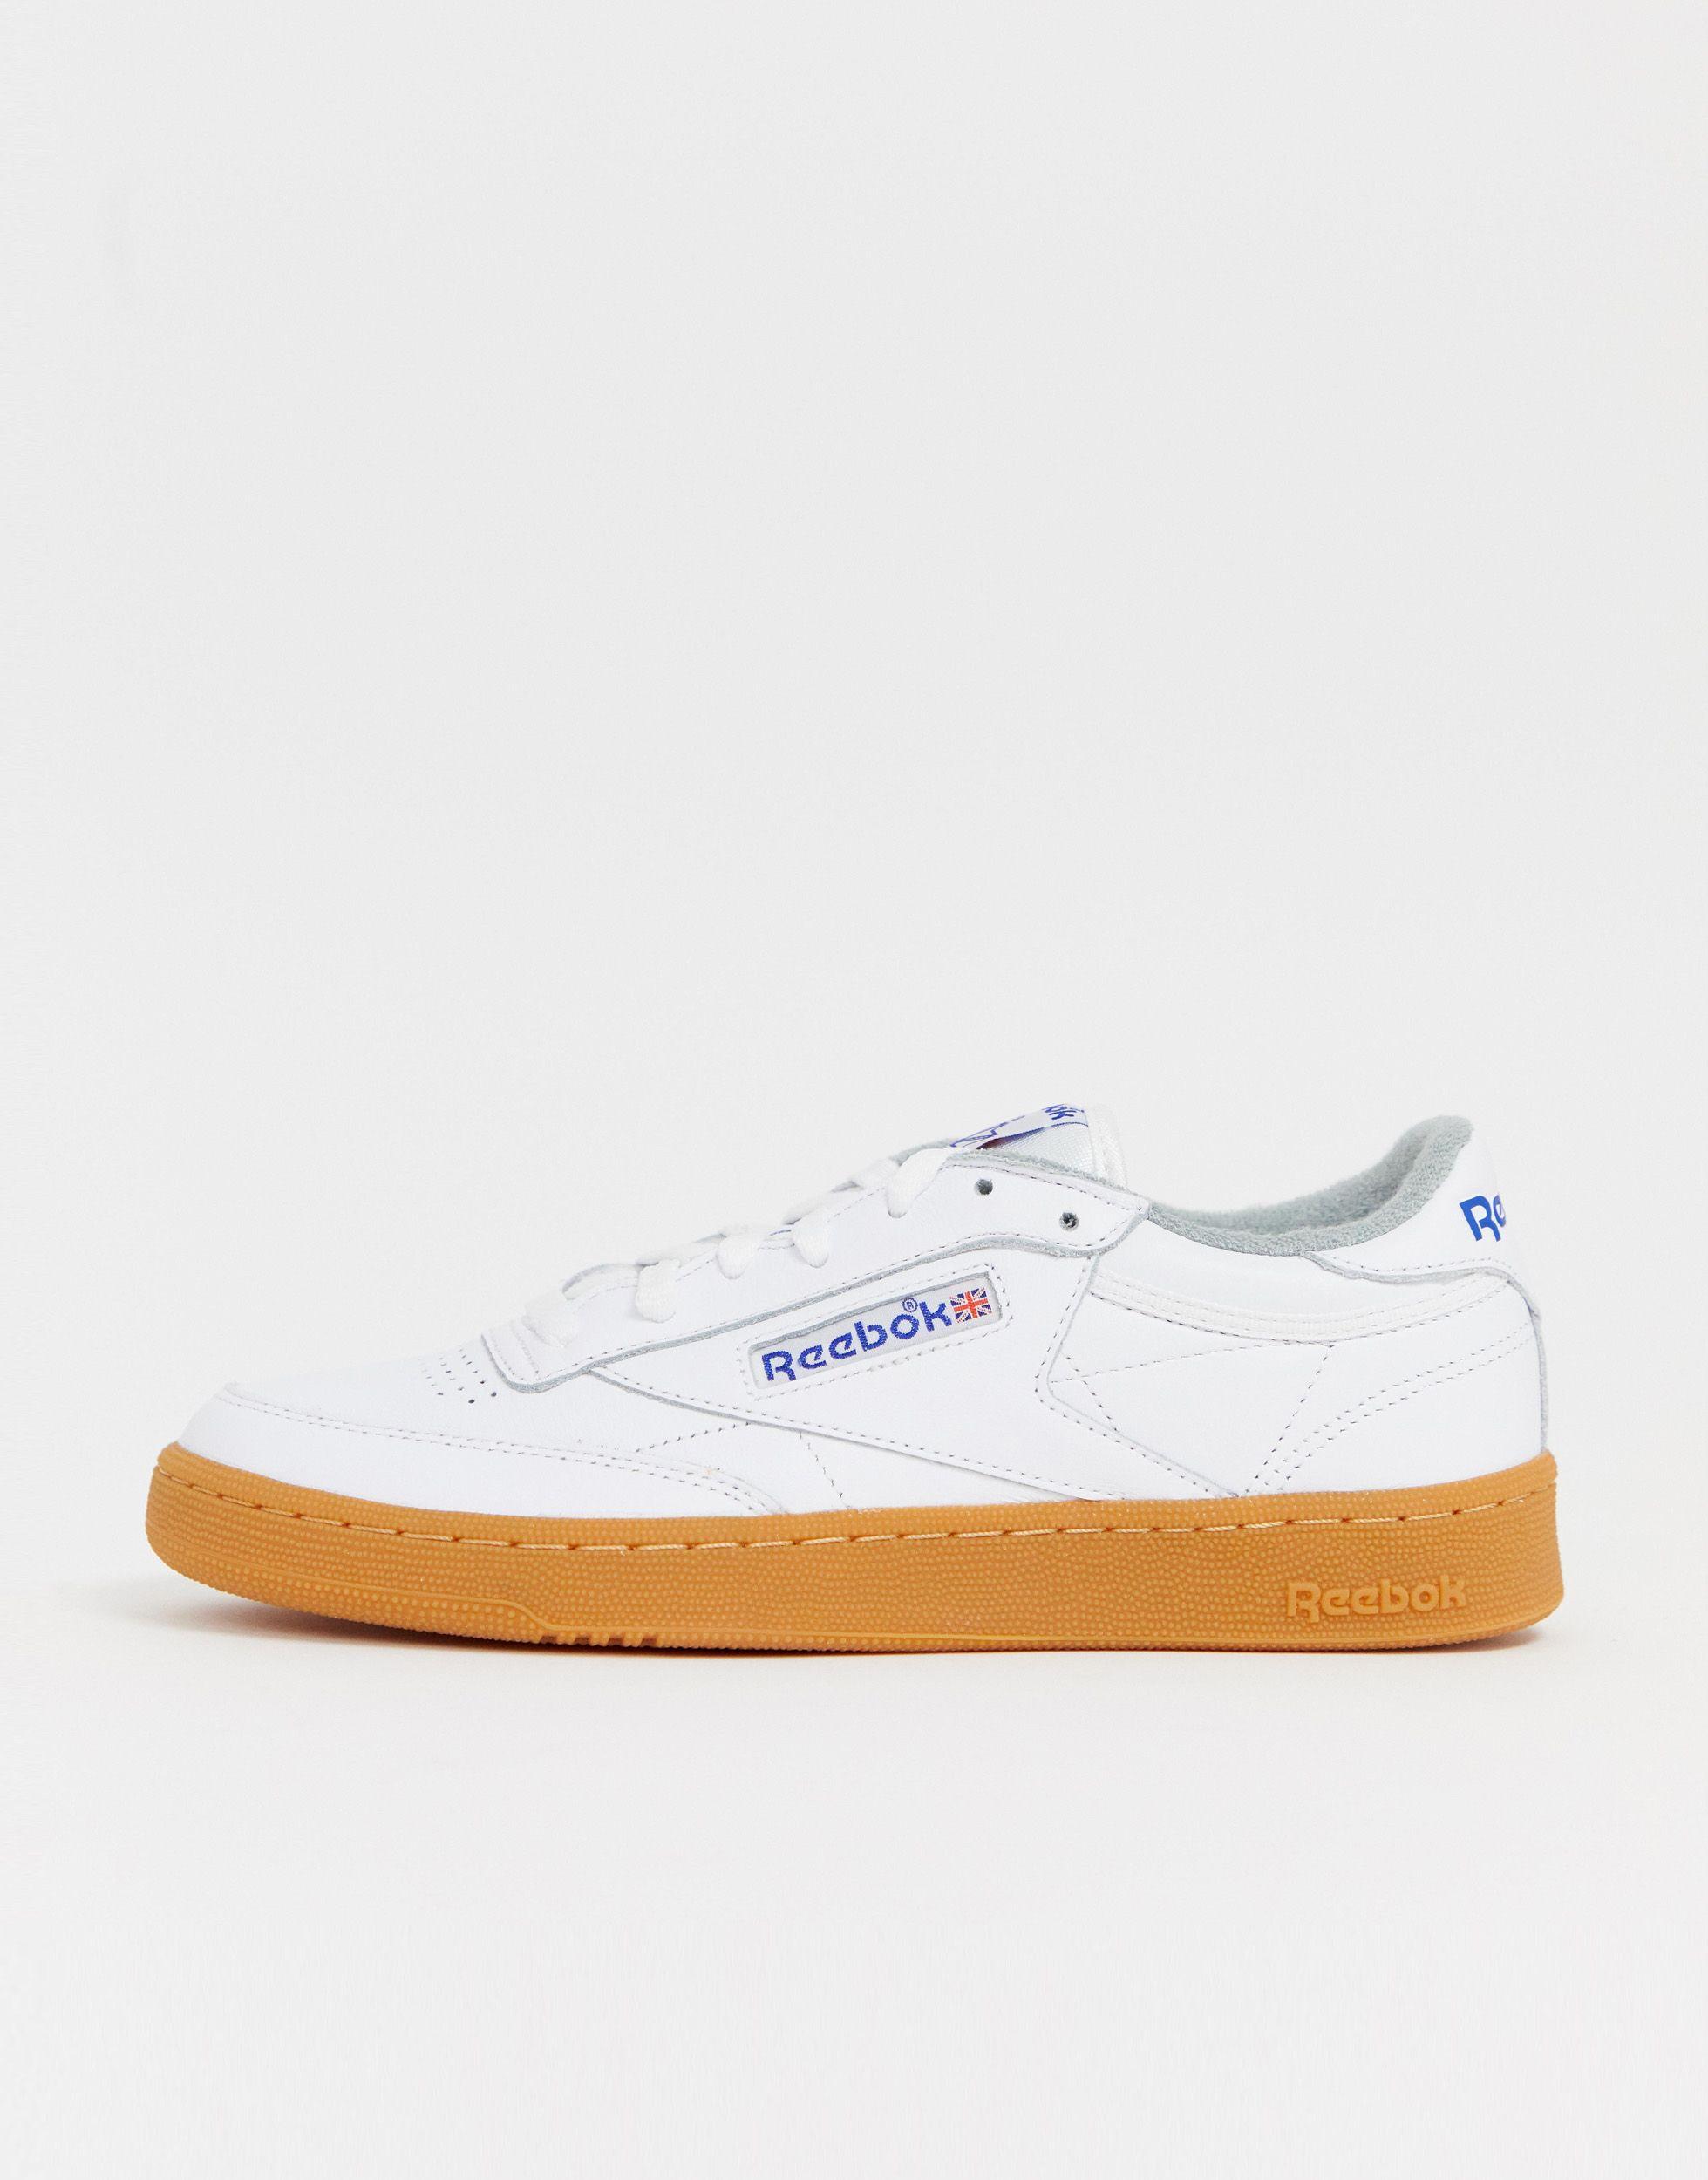 Reebok Leather C 85 Trainers Gum Sole in White for Men - Lyst